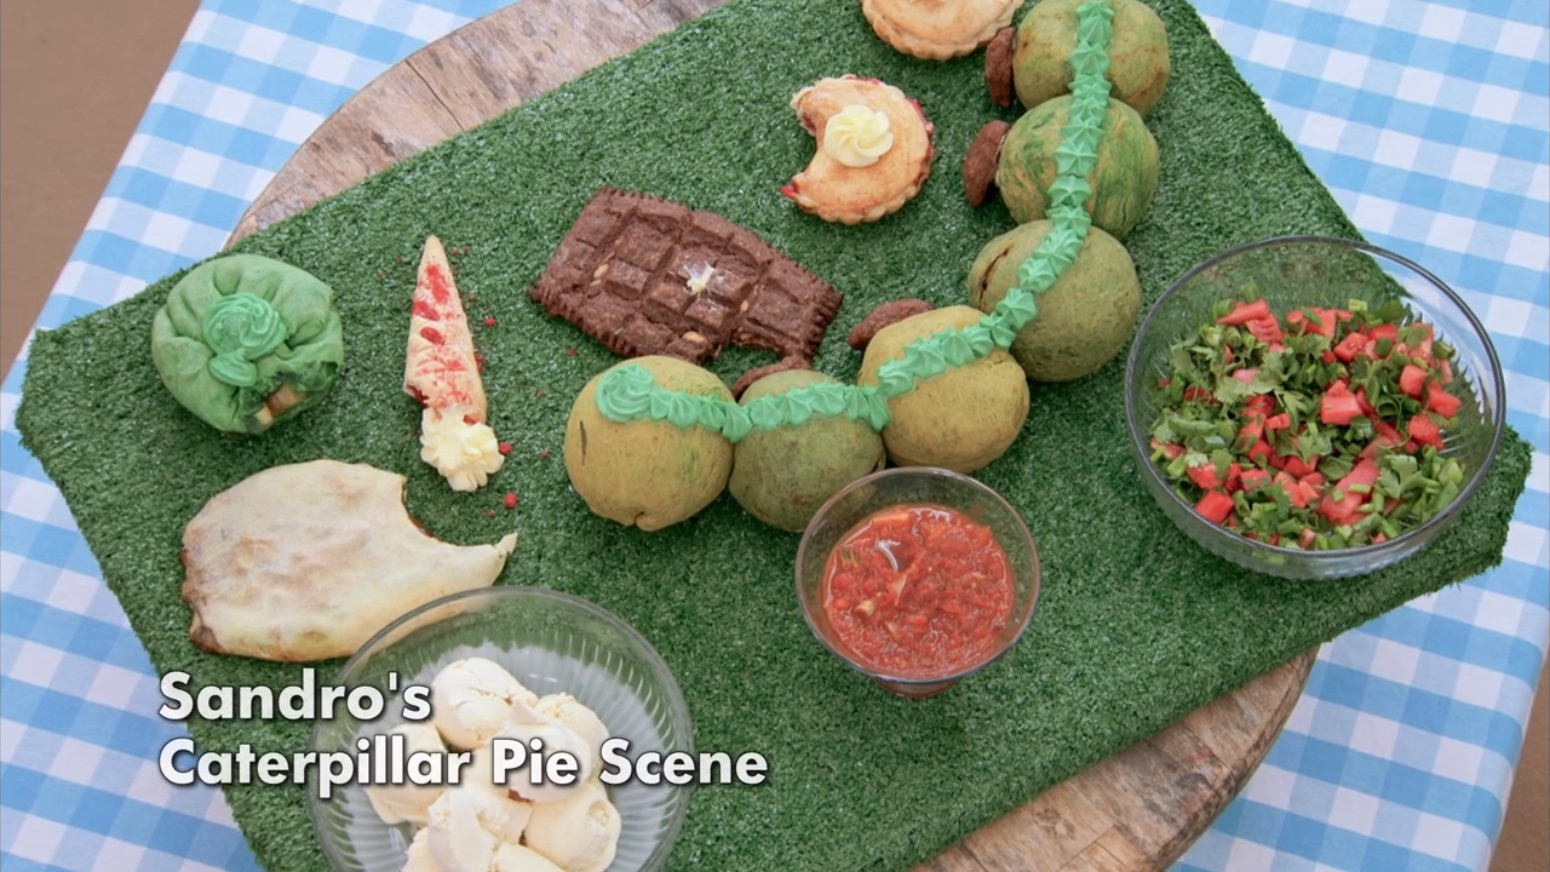 Picture shows: Sandro's Caterpillar Pie Scene Showstopper from The Great British Baking Show Collection 10's Pastry Week